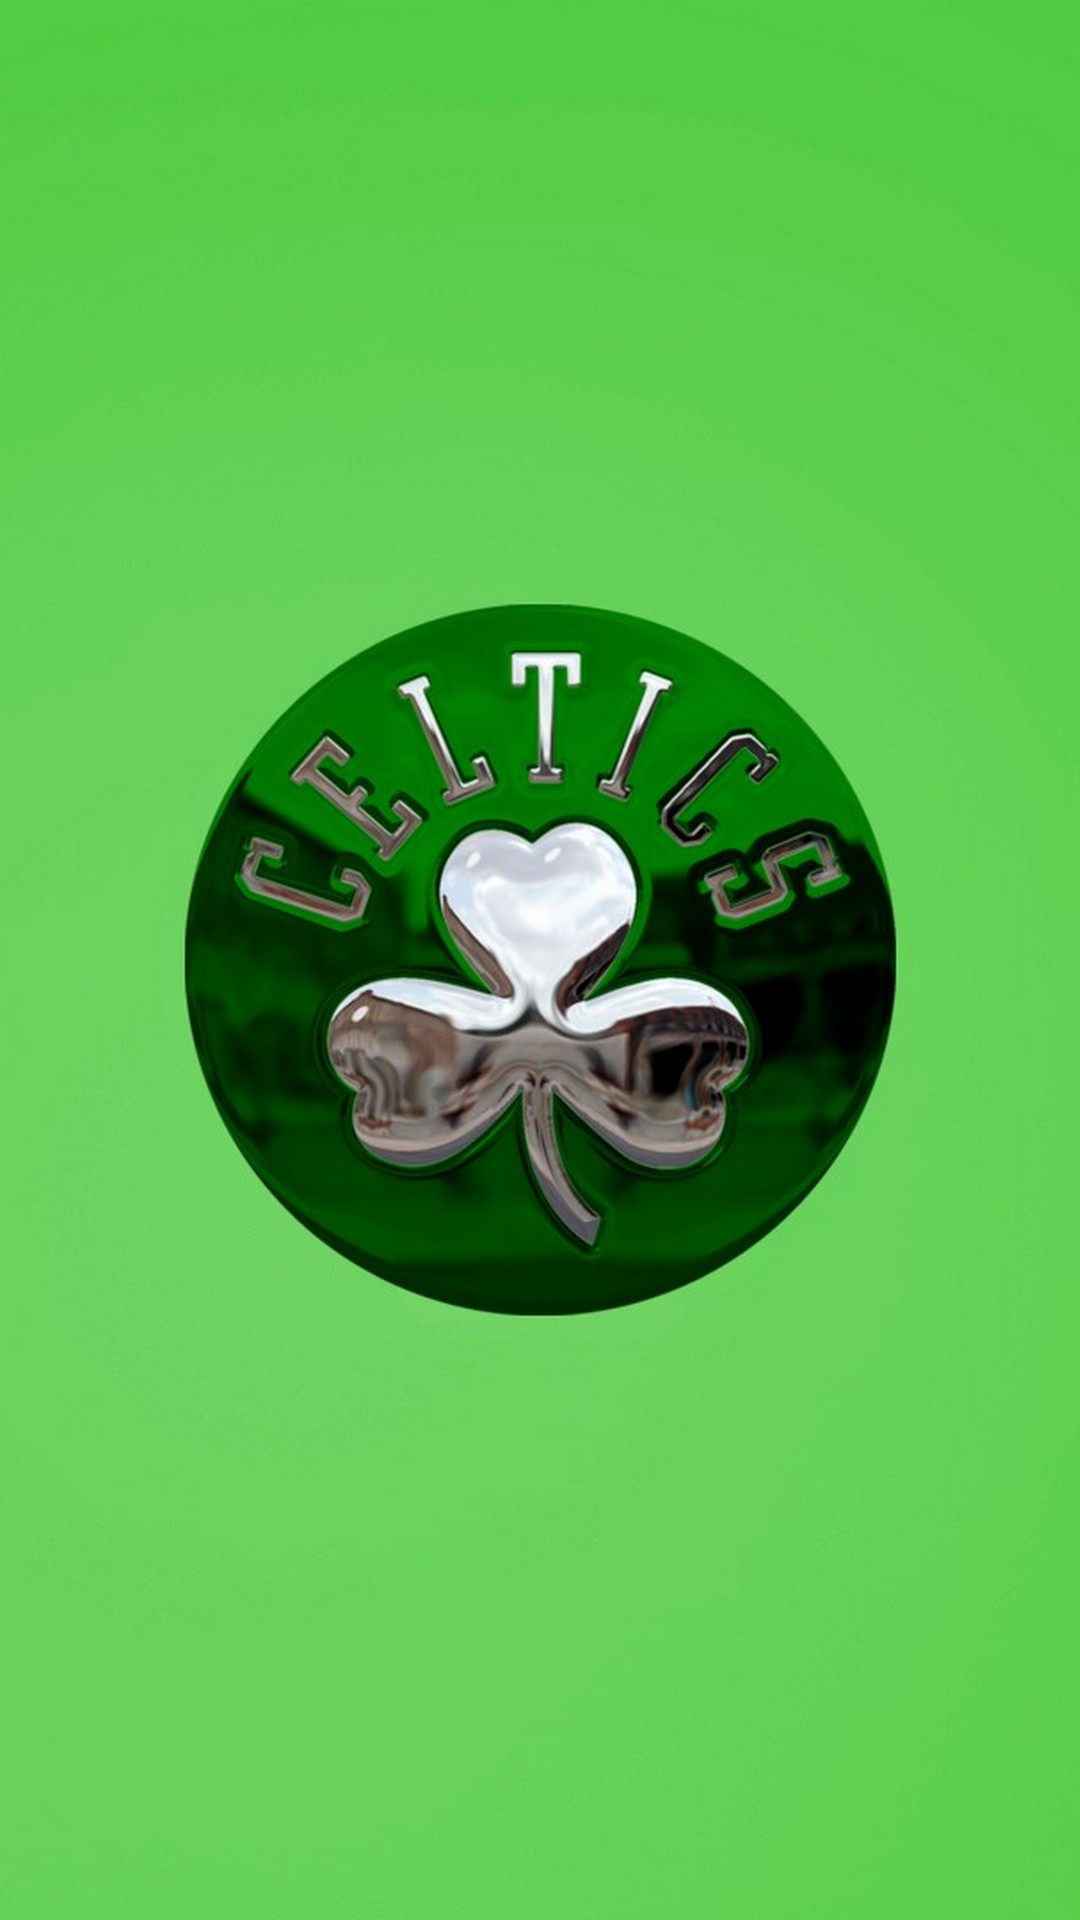 Mobile Wallpapers Boston Celtics Logo with image resolution 1080x1920 pixel. You can make this wallpaper for your iPhone 5, 6, 7, 8, X backgrounds, Mobile Screensaver, or iPad Lock Screen